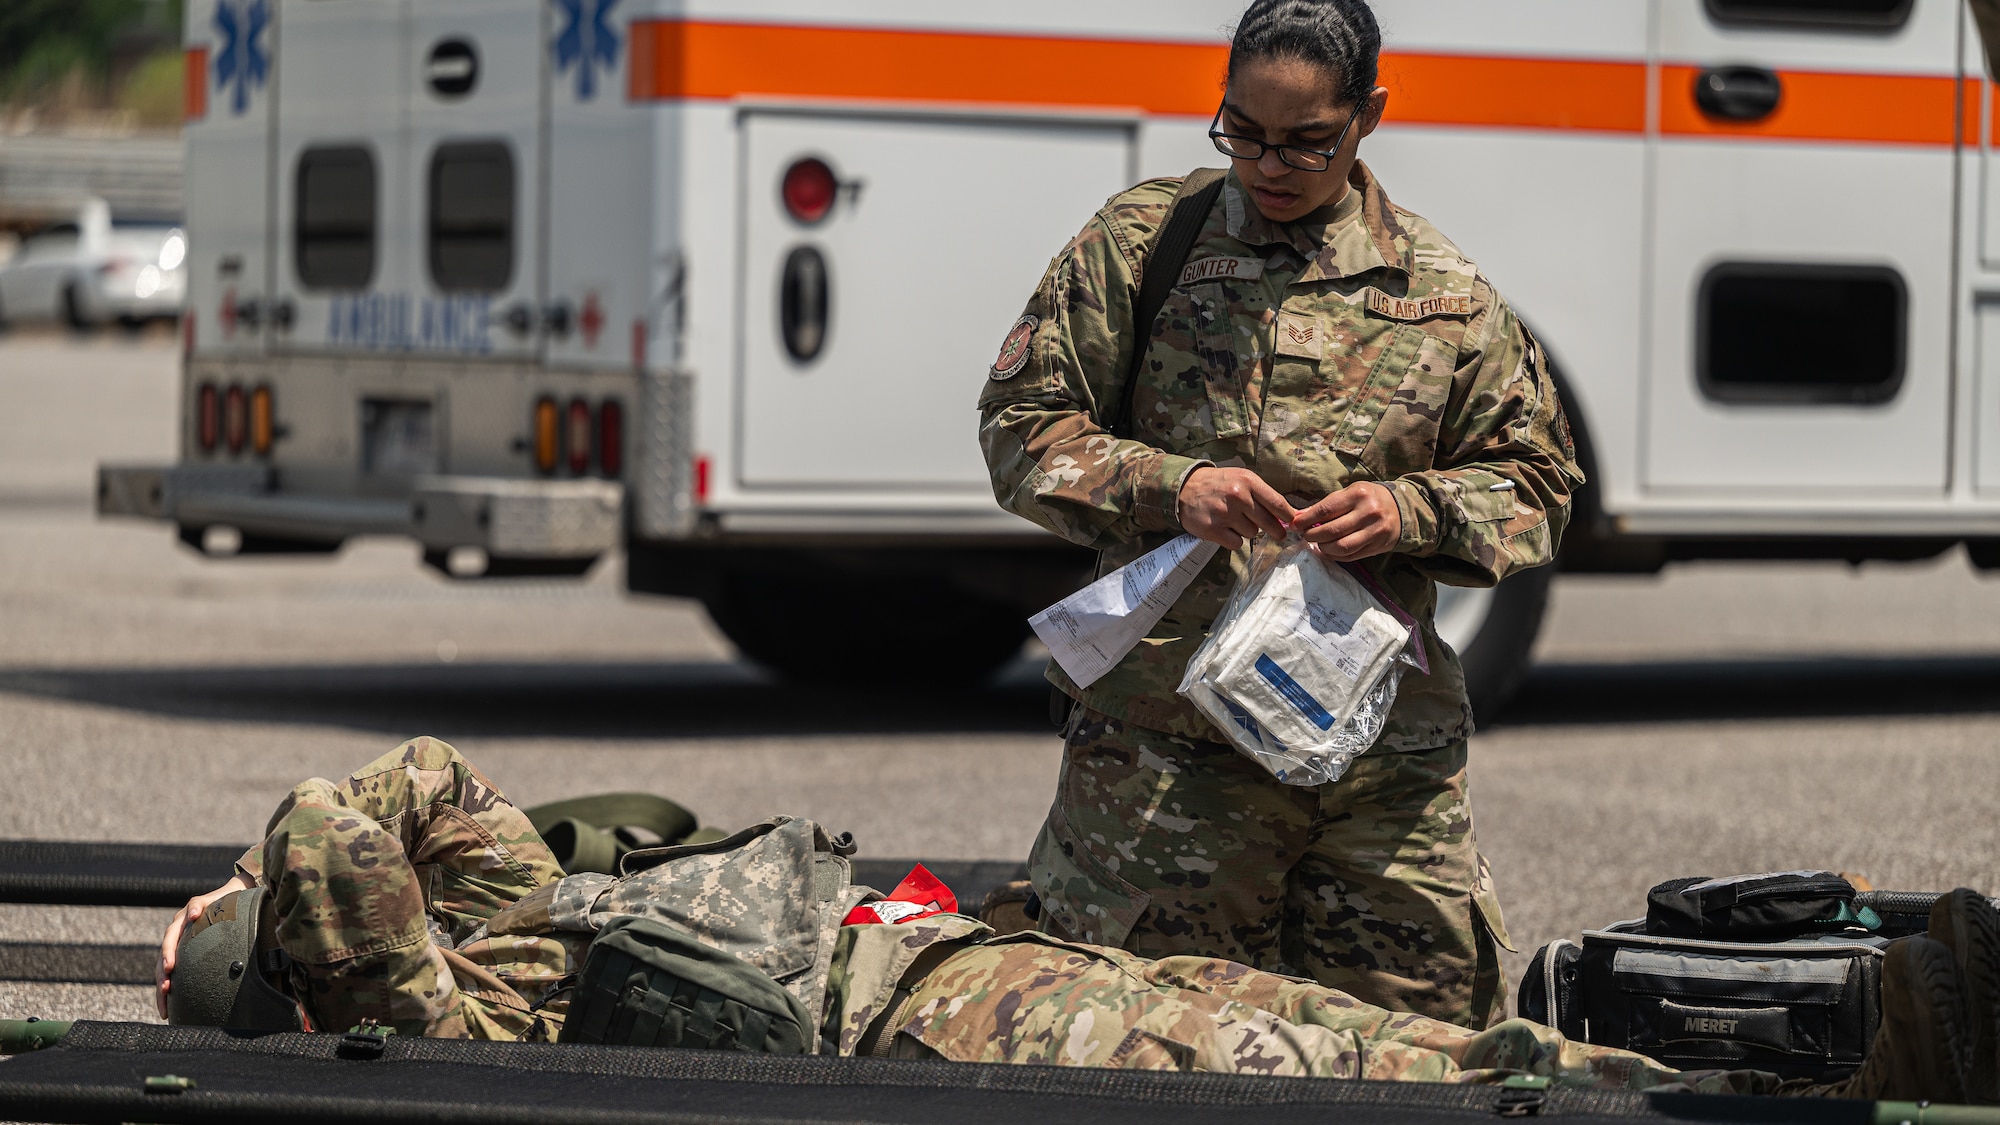 Staff Sgt. Bionca Gunter renders medical aid to a simulated casualty.